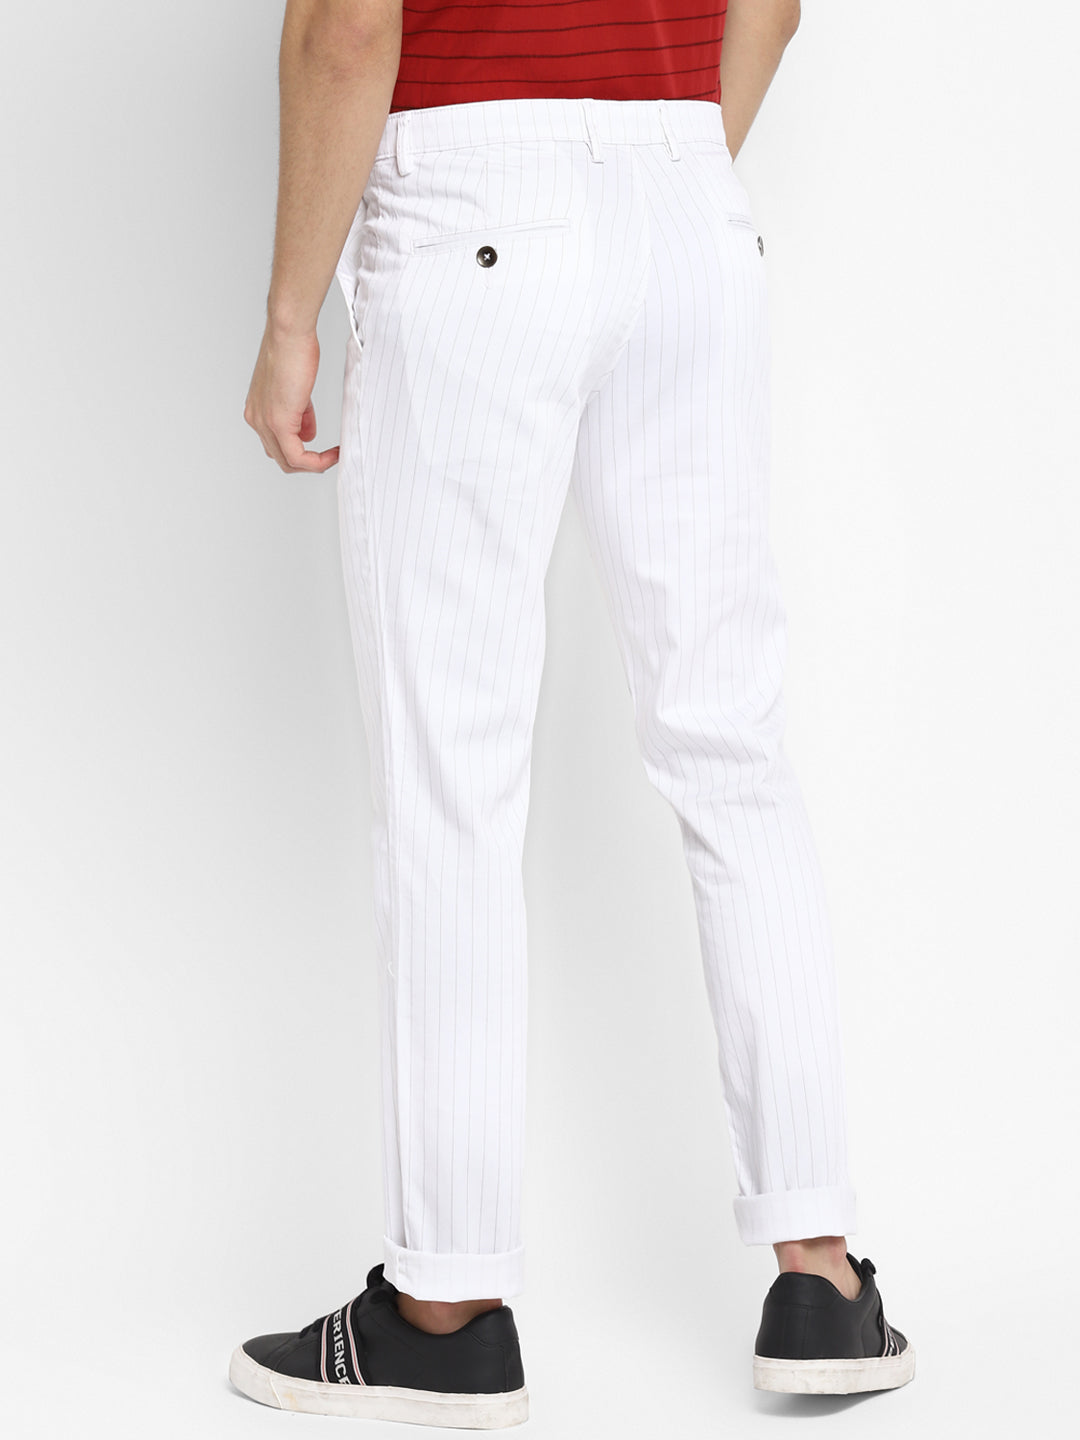 Cotton Stretch White Striped Narrow Fit Flat Front Casual Trouser